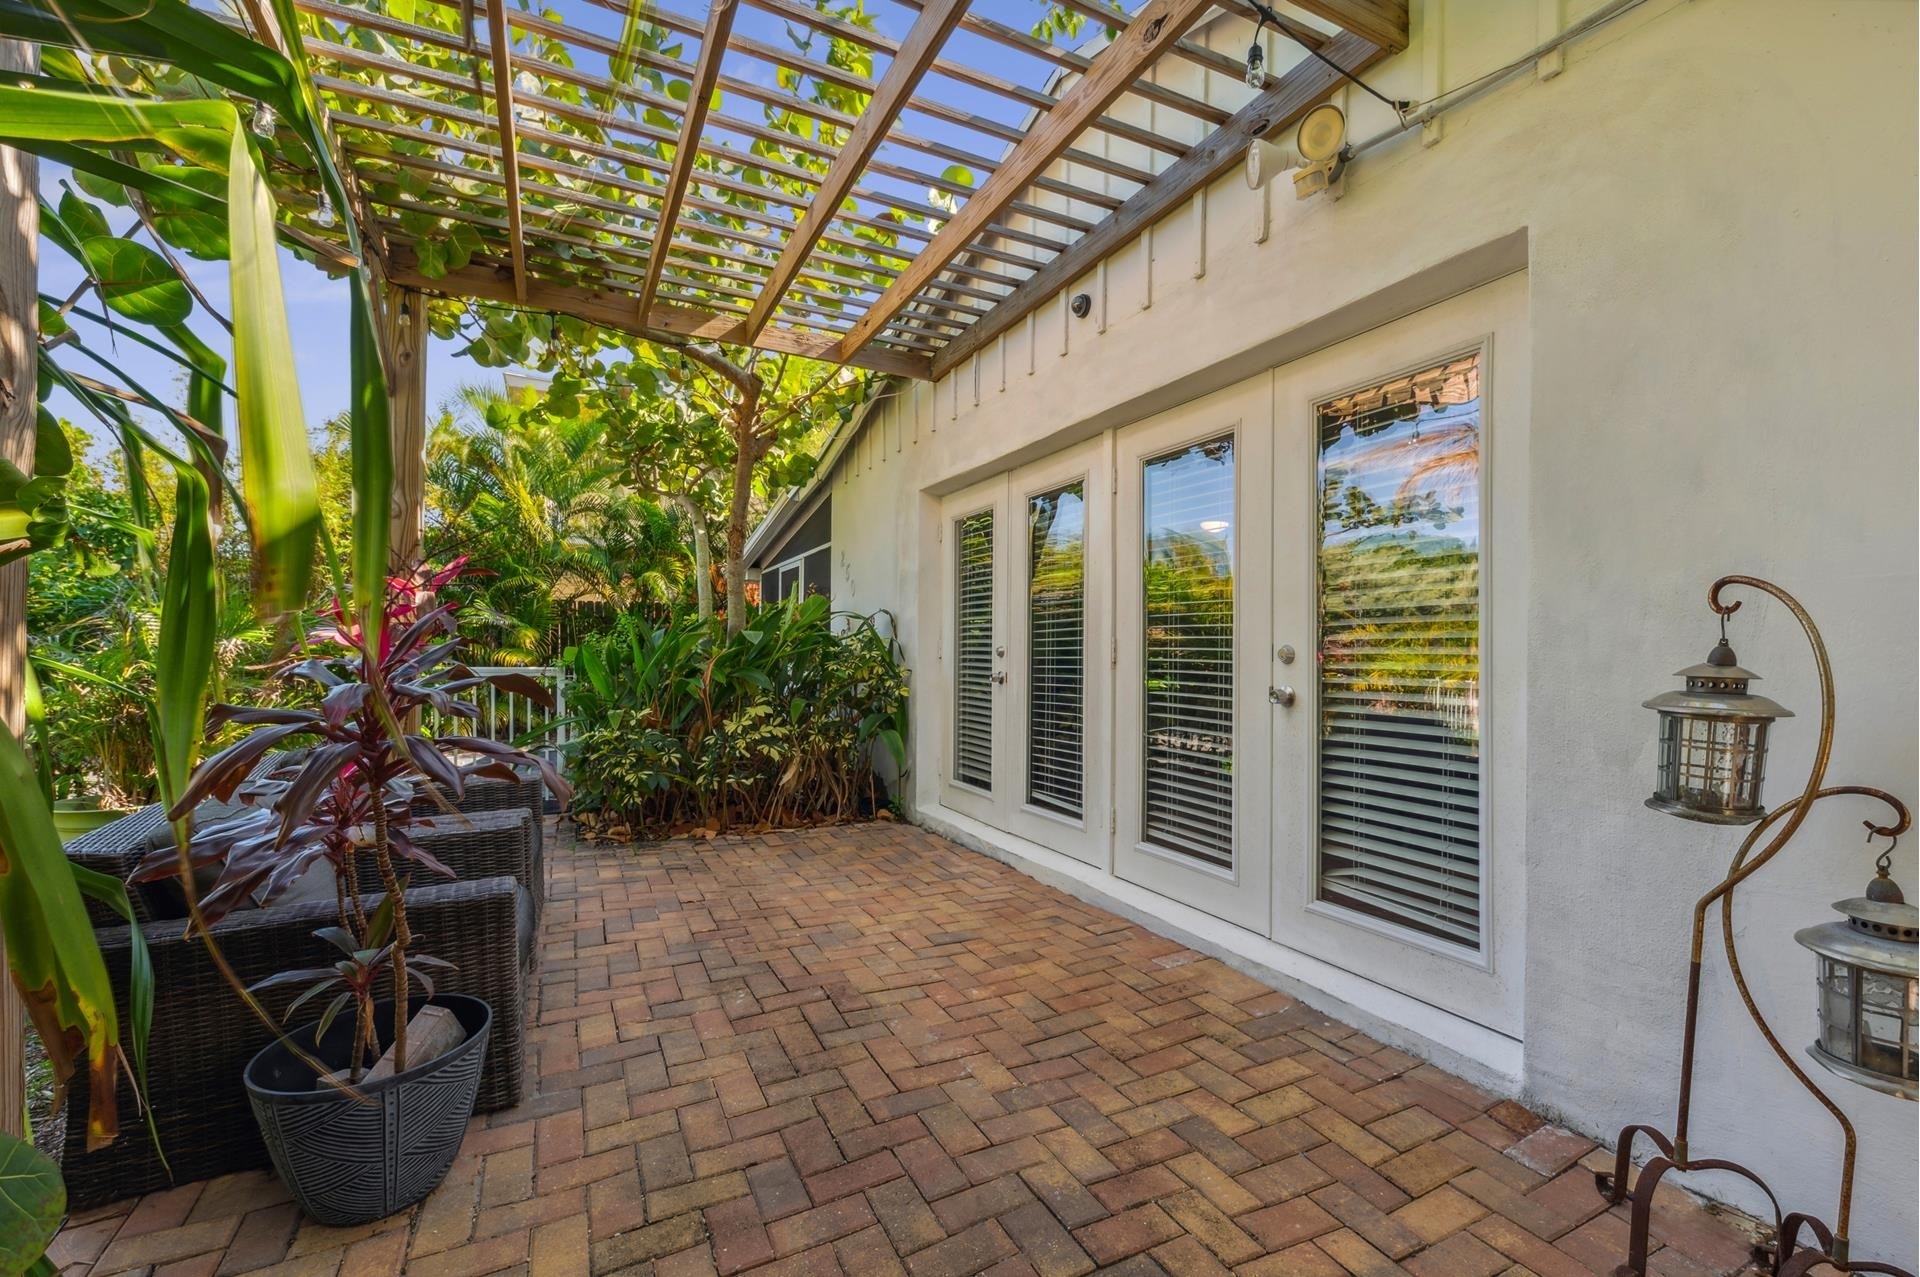 Single Family Home for Sale at Seacrest, Delray Beach, Florida 33444